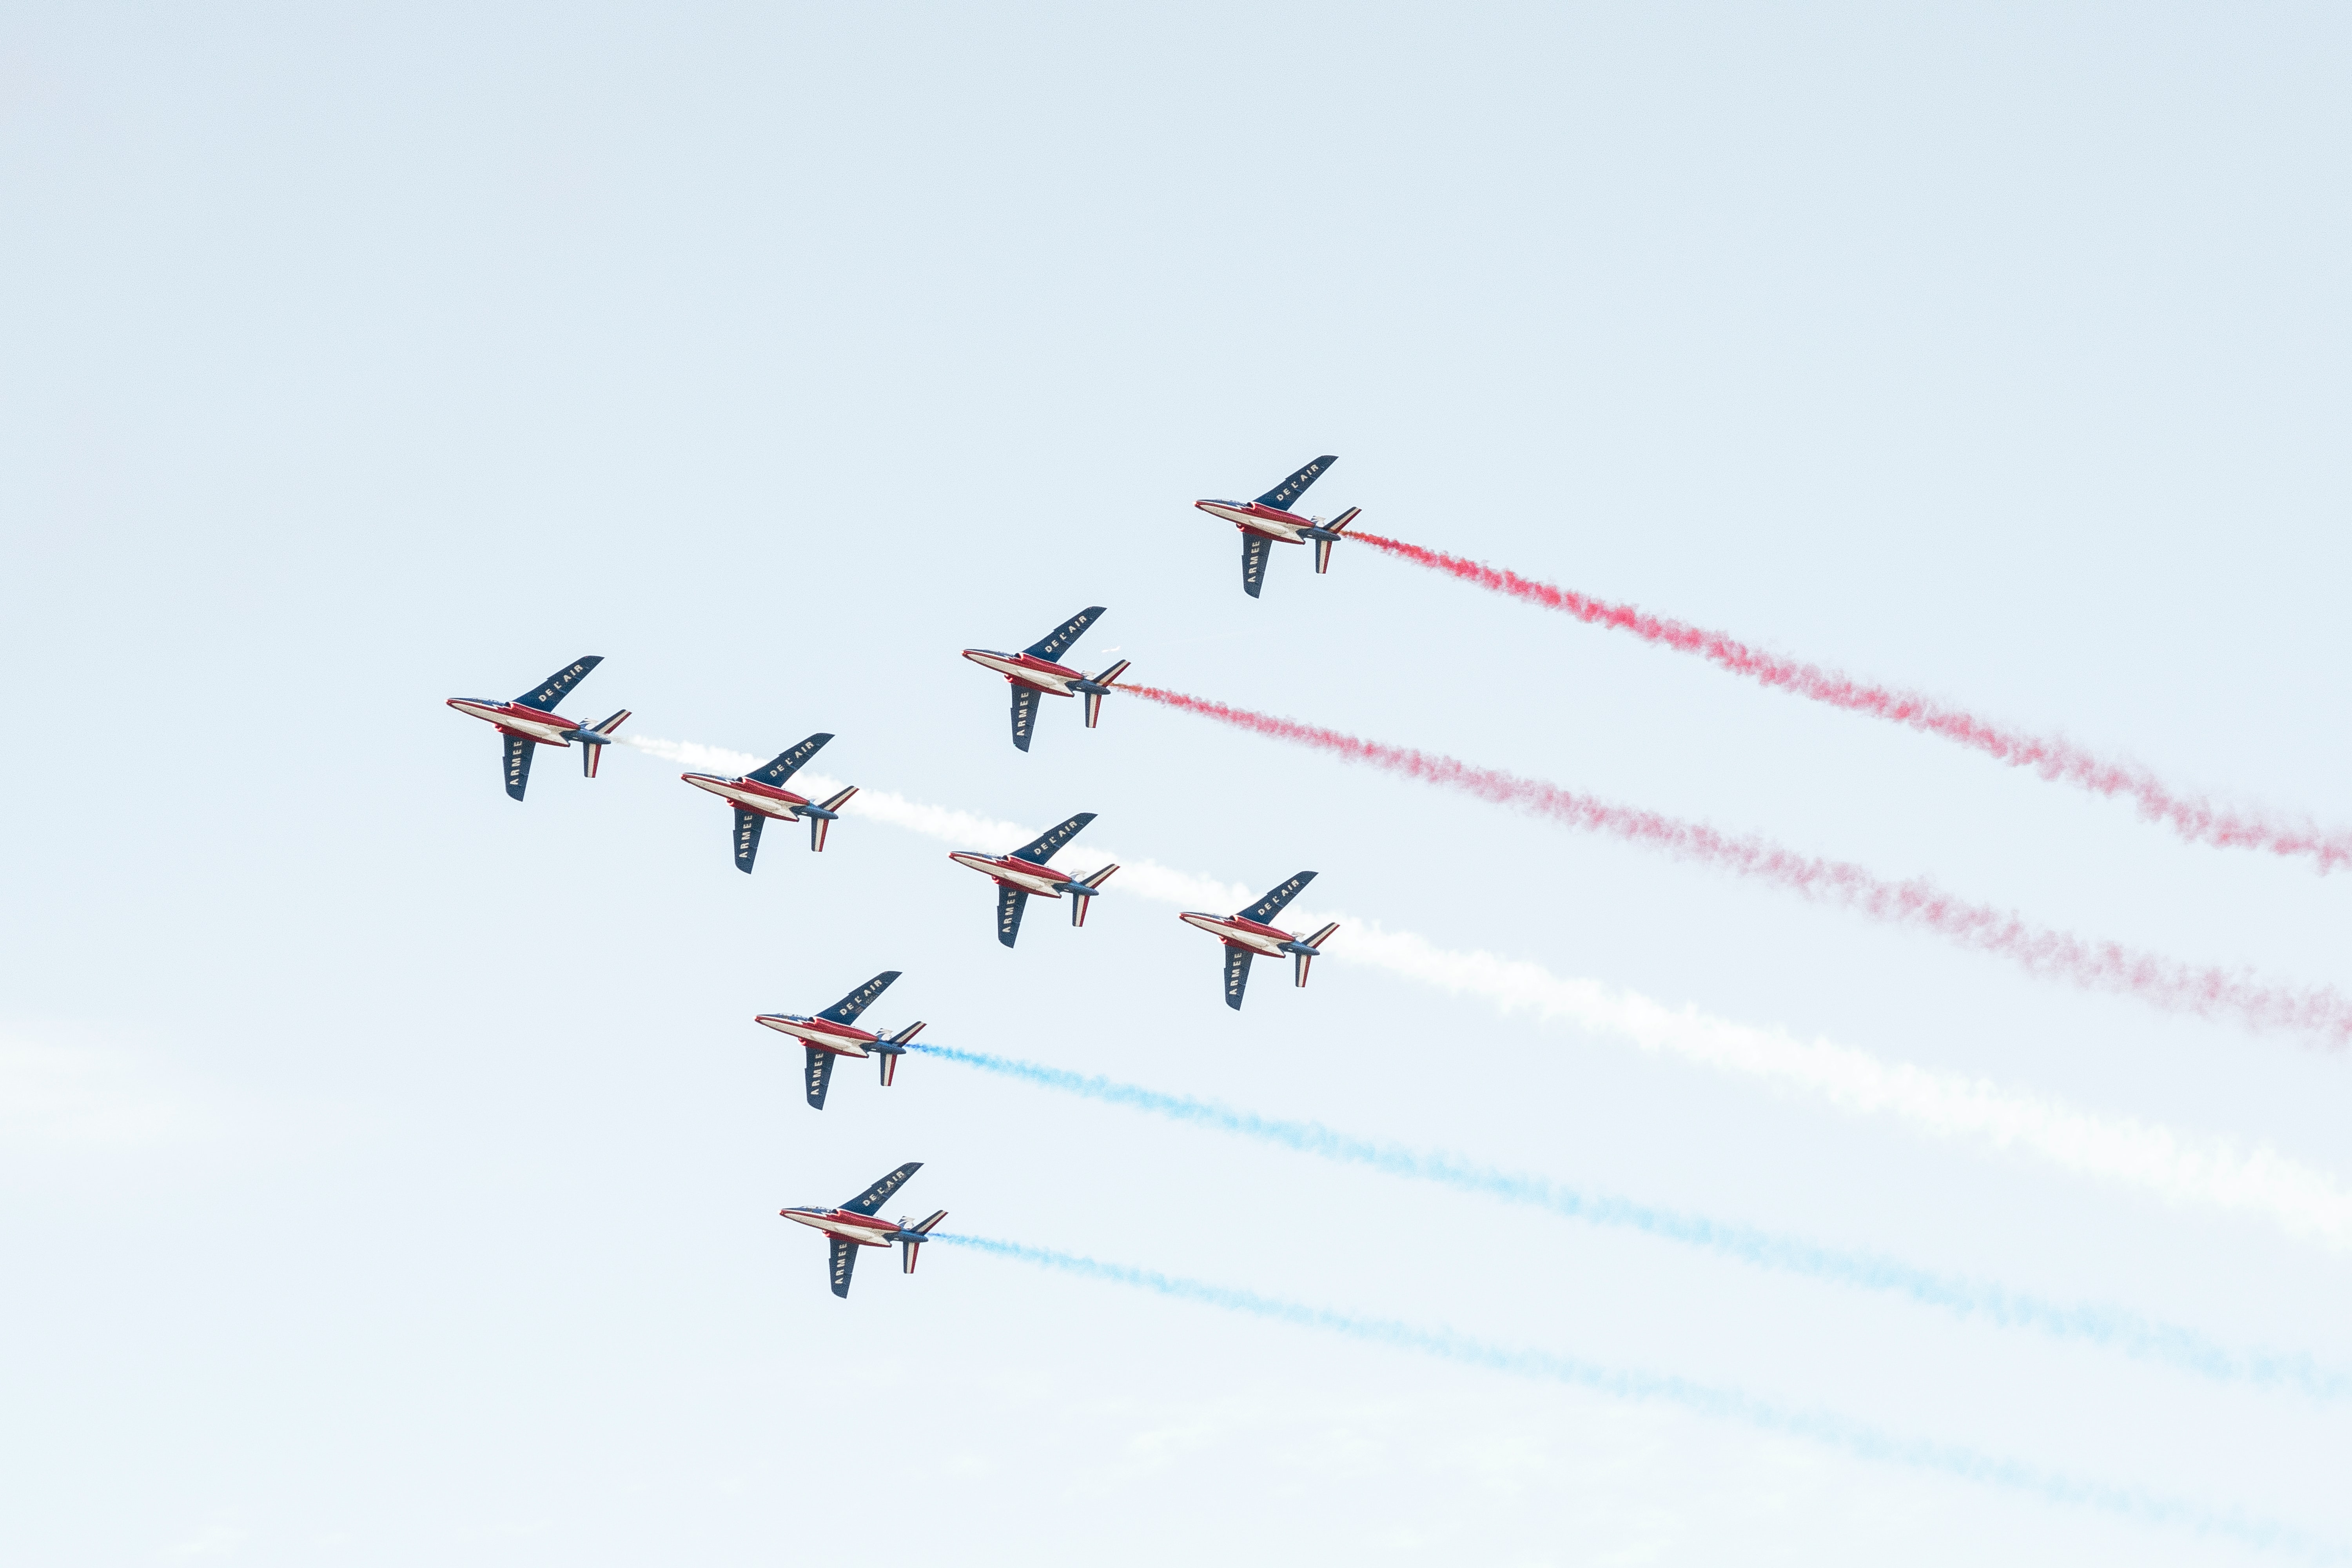 Decorative, planes in a formation